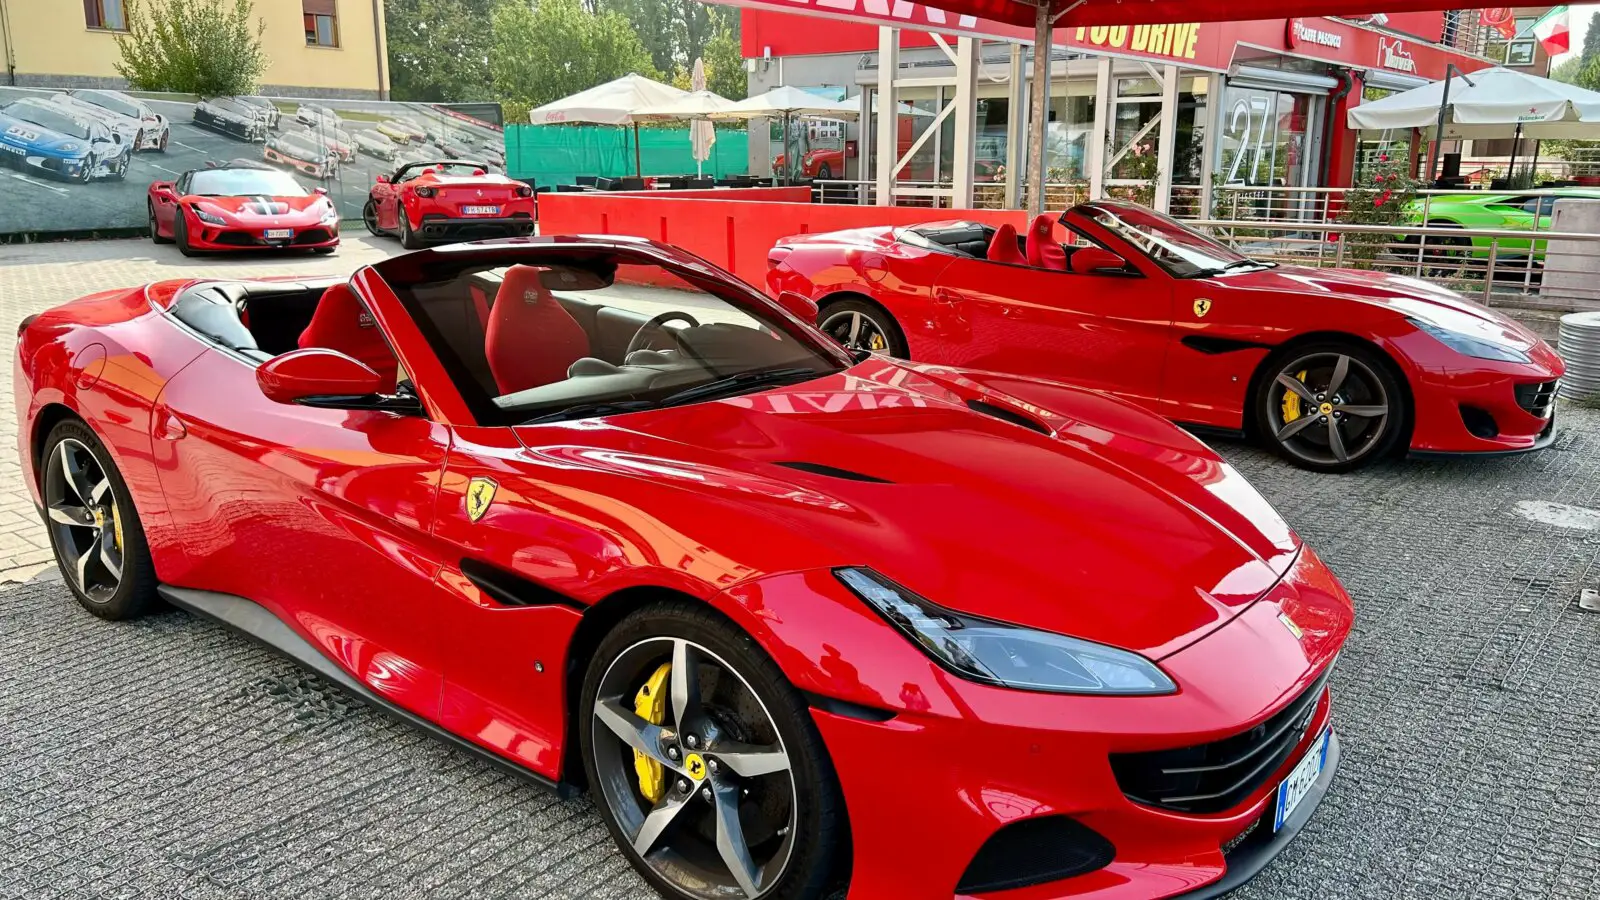 Two red Ferraris parked in Maranello, Italy